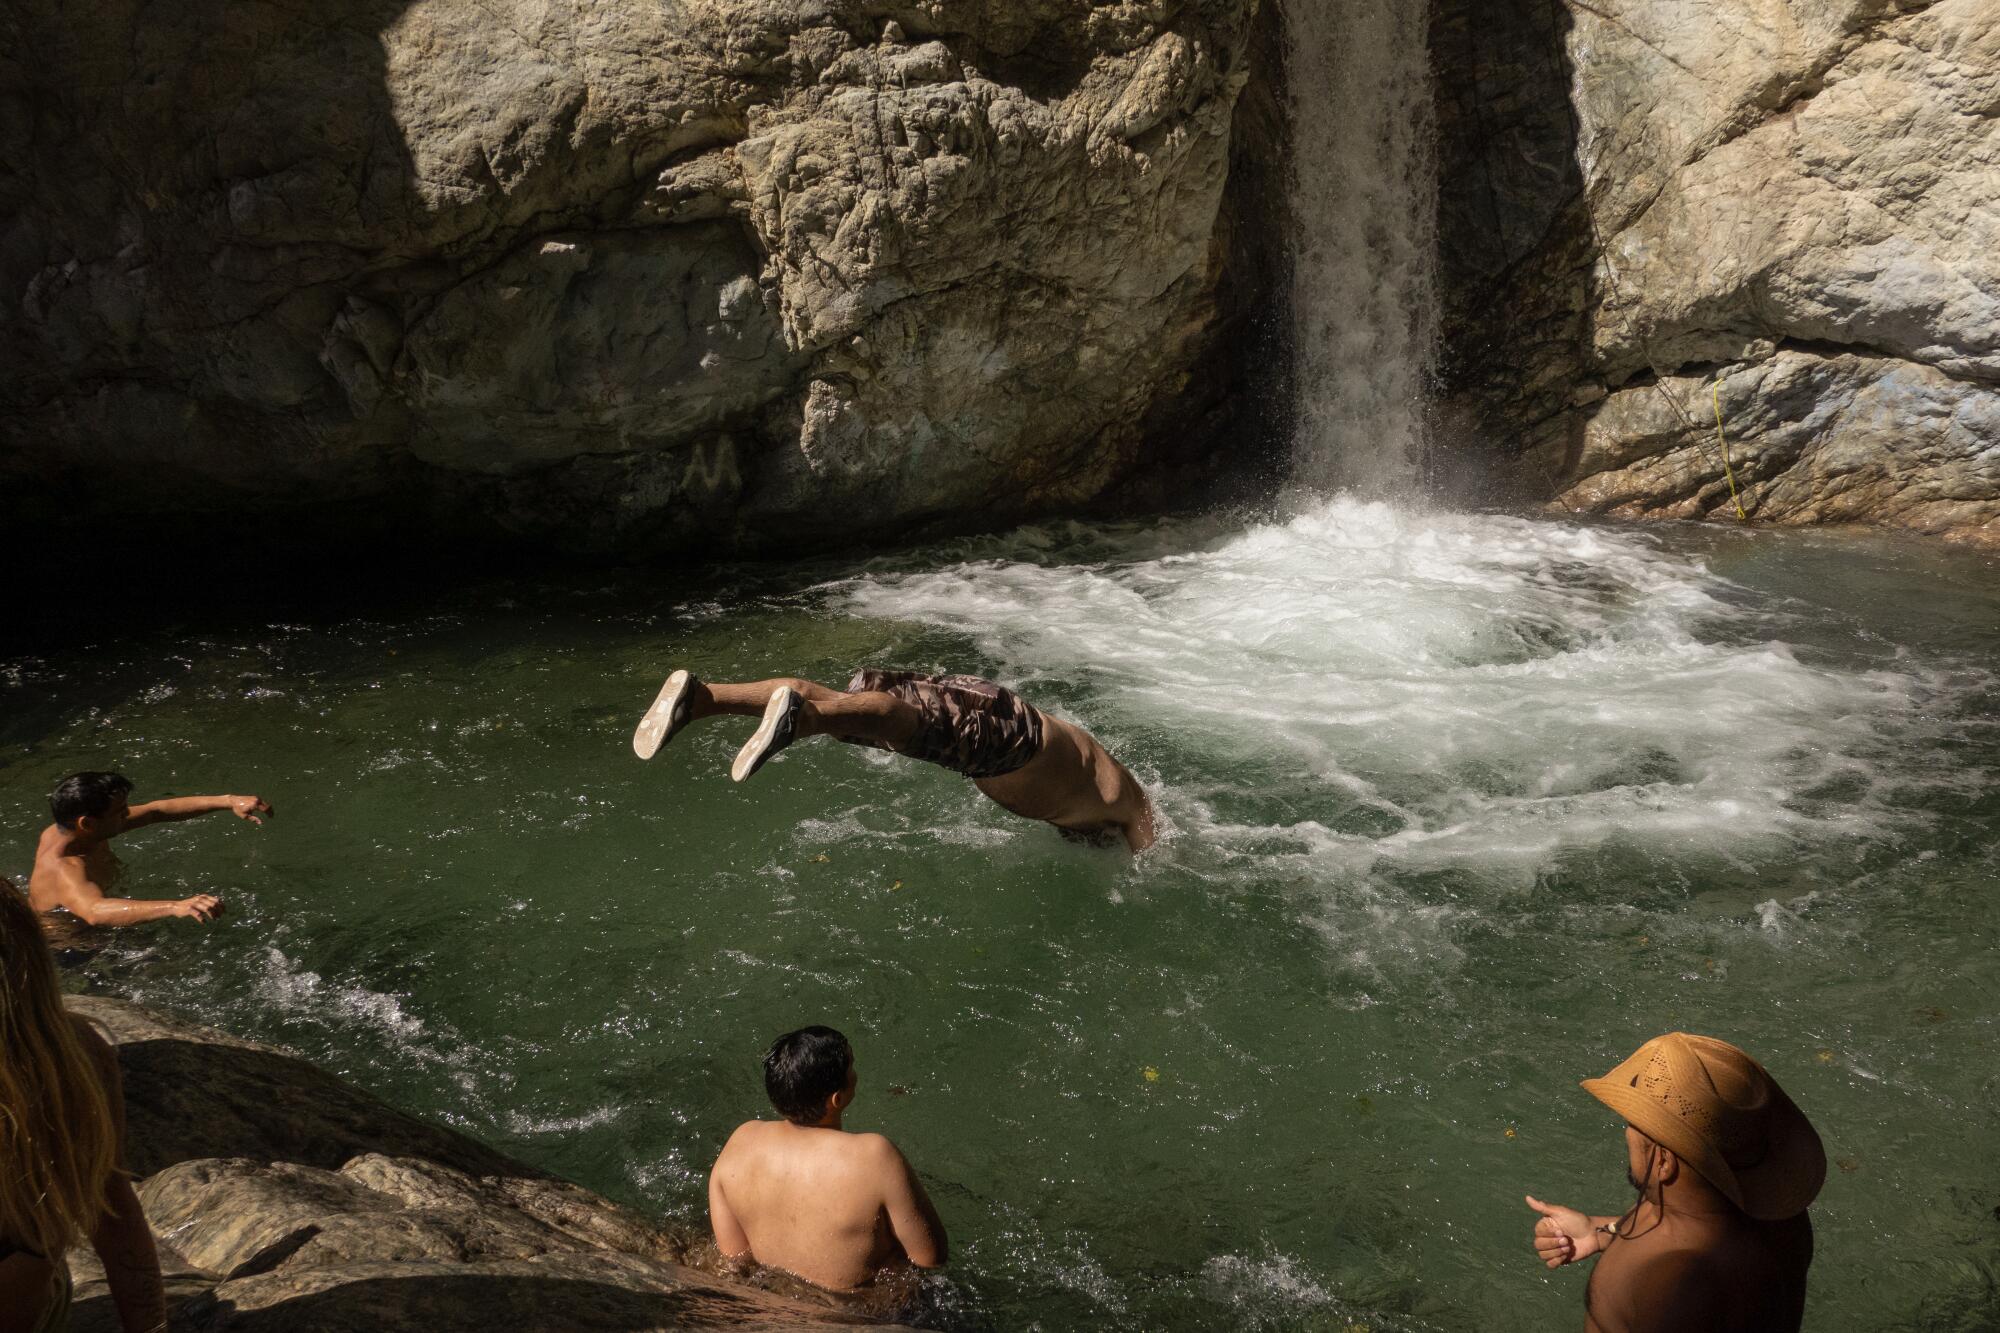 Visitors swim in the pool at Stoddard Canyon Falls and Slide in Mt. Baldy.